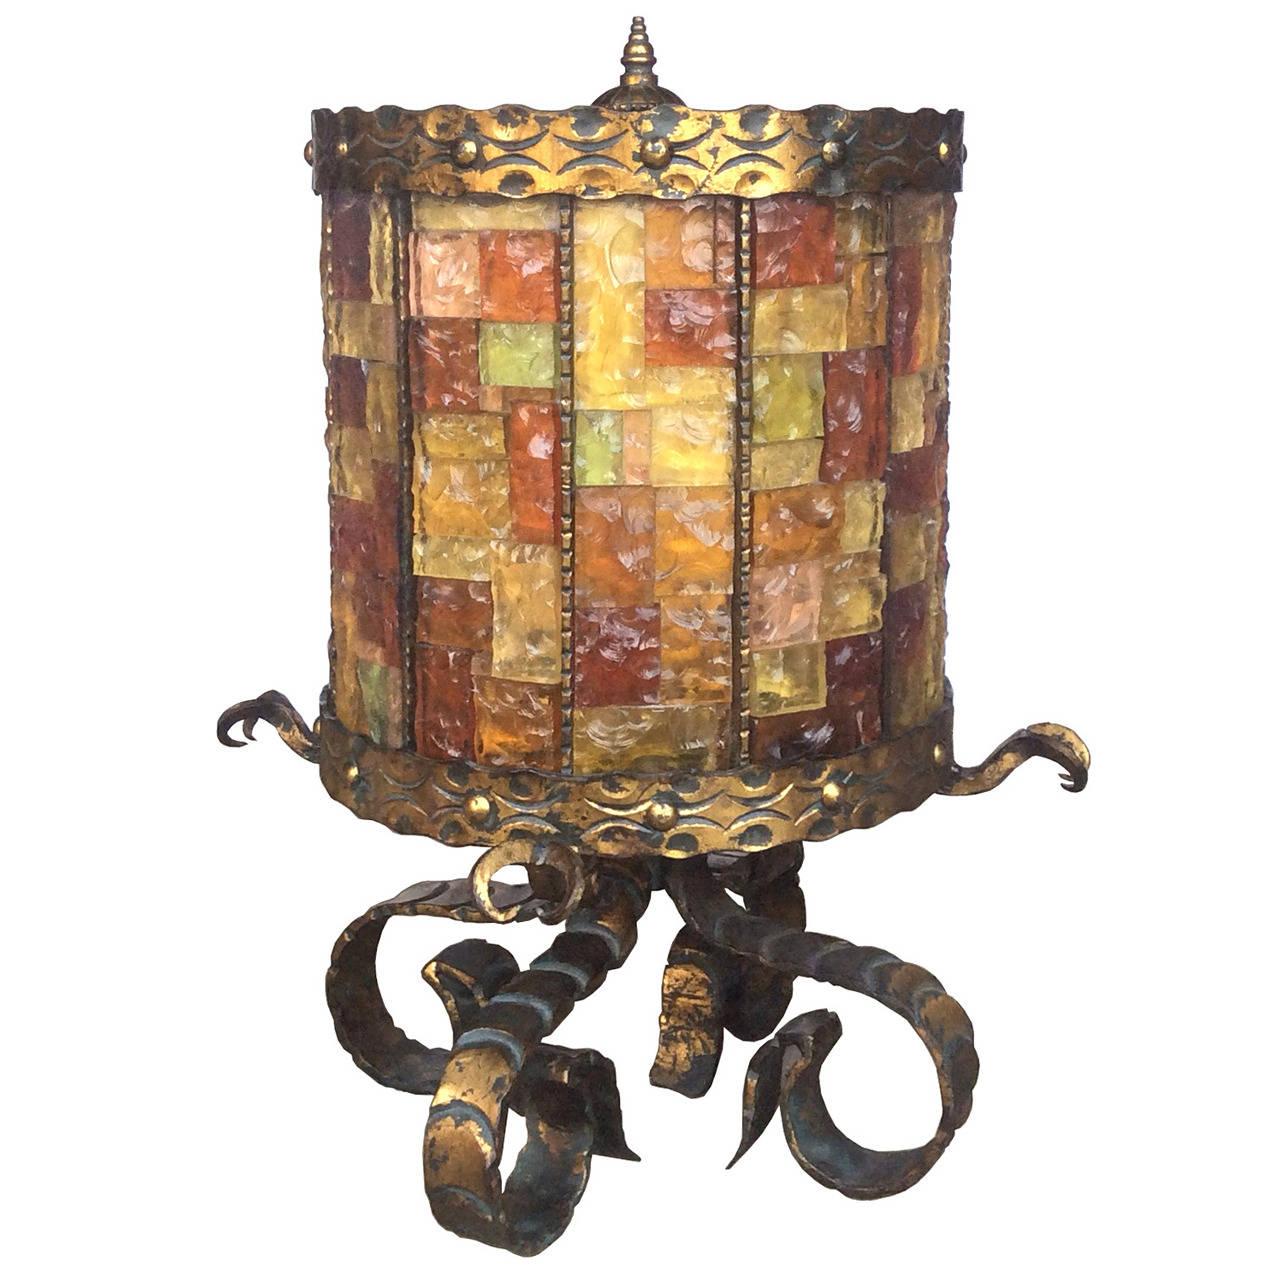 A large cast patined bronze lamp with multicolor glass in the style of Poliarte.

Italian, Circa 1970's